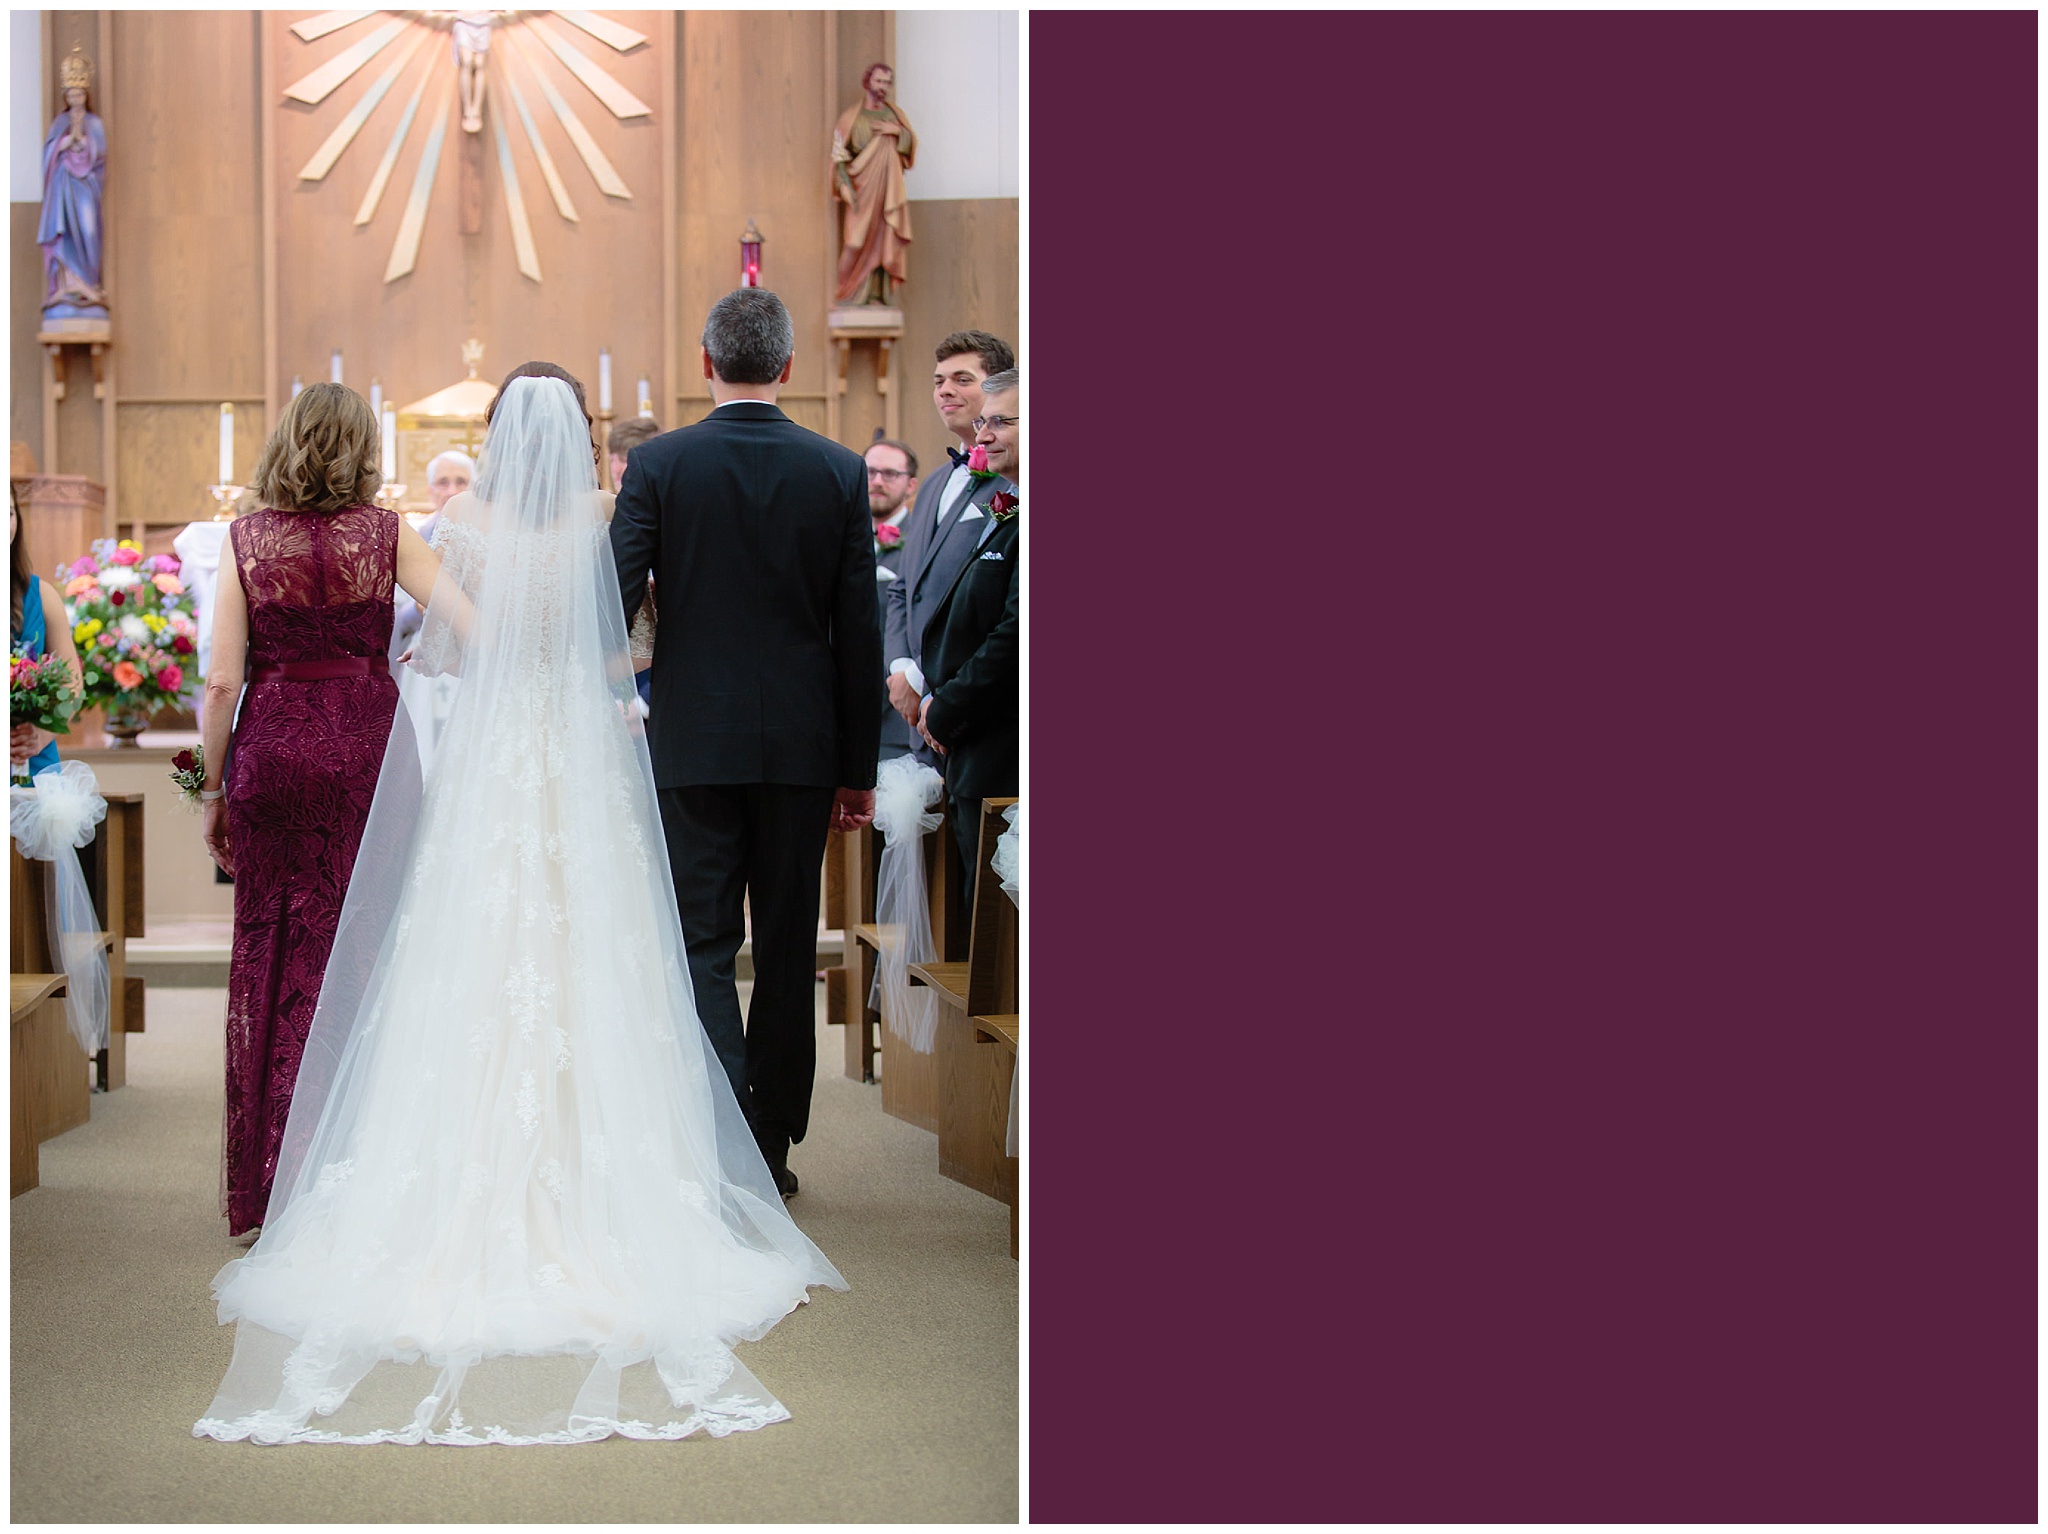 Bride's cathedral veil cascades to the floor as she walks down the aisle at Saint Monica Parish